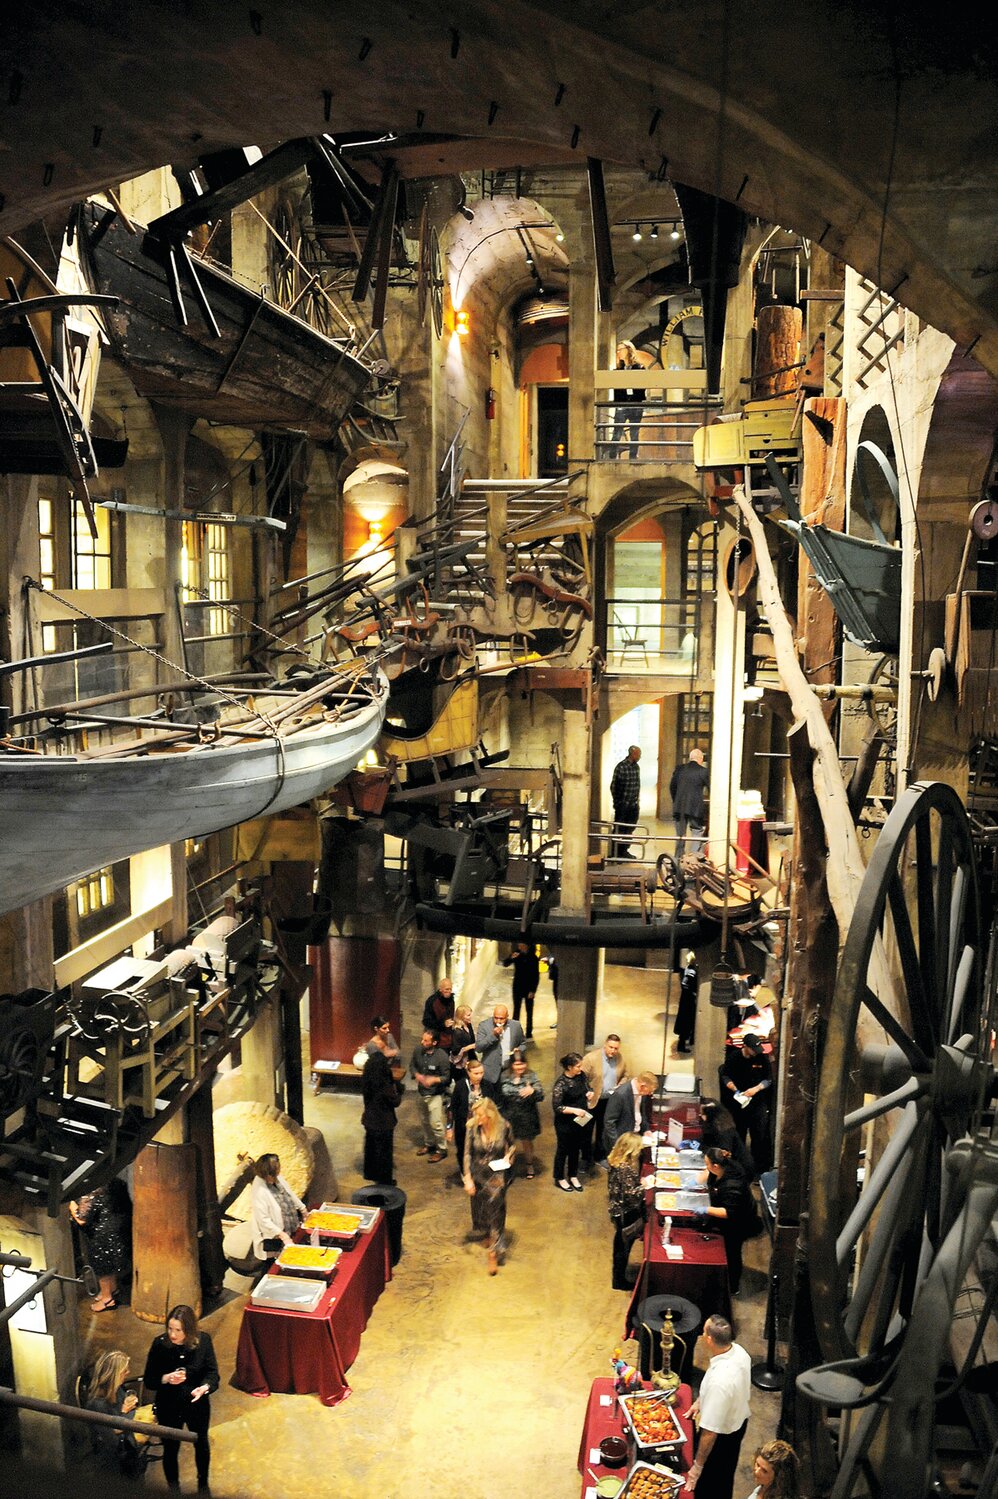 Guests circulate inside the Mercer Museum during last week’s “Cocktails at the Castle” event.